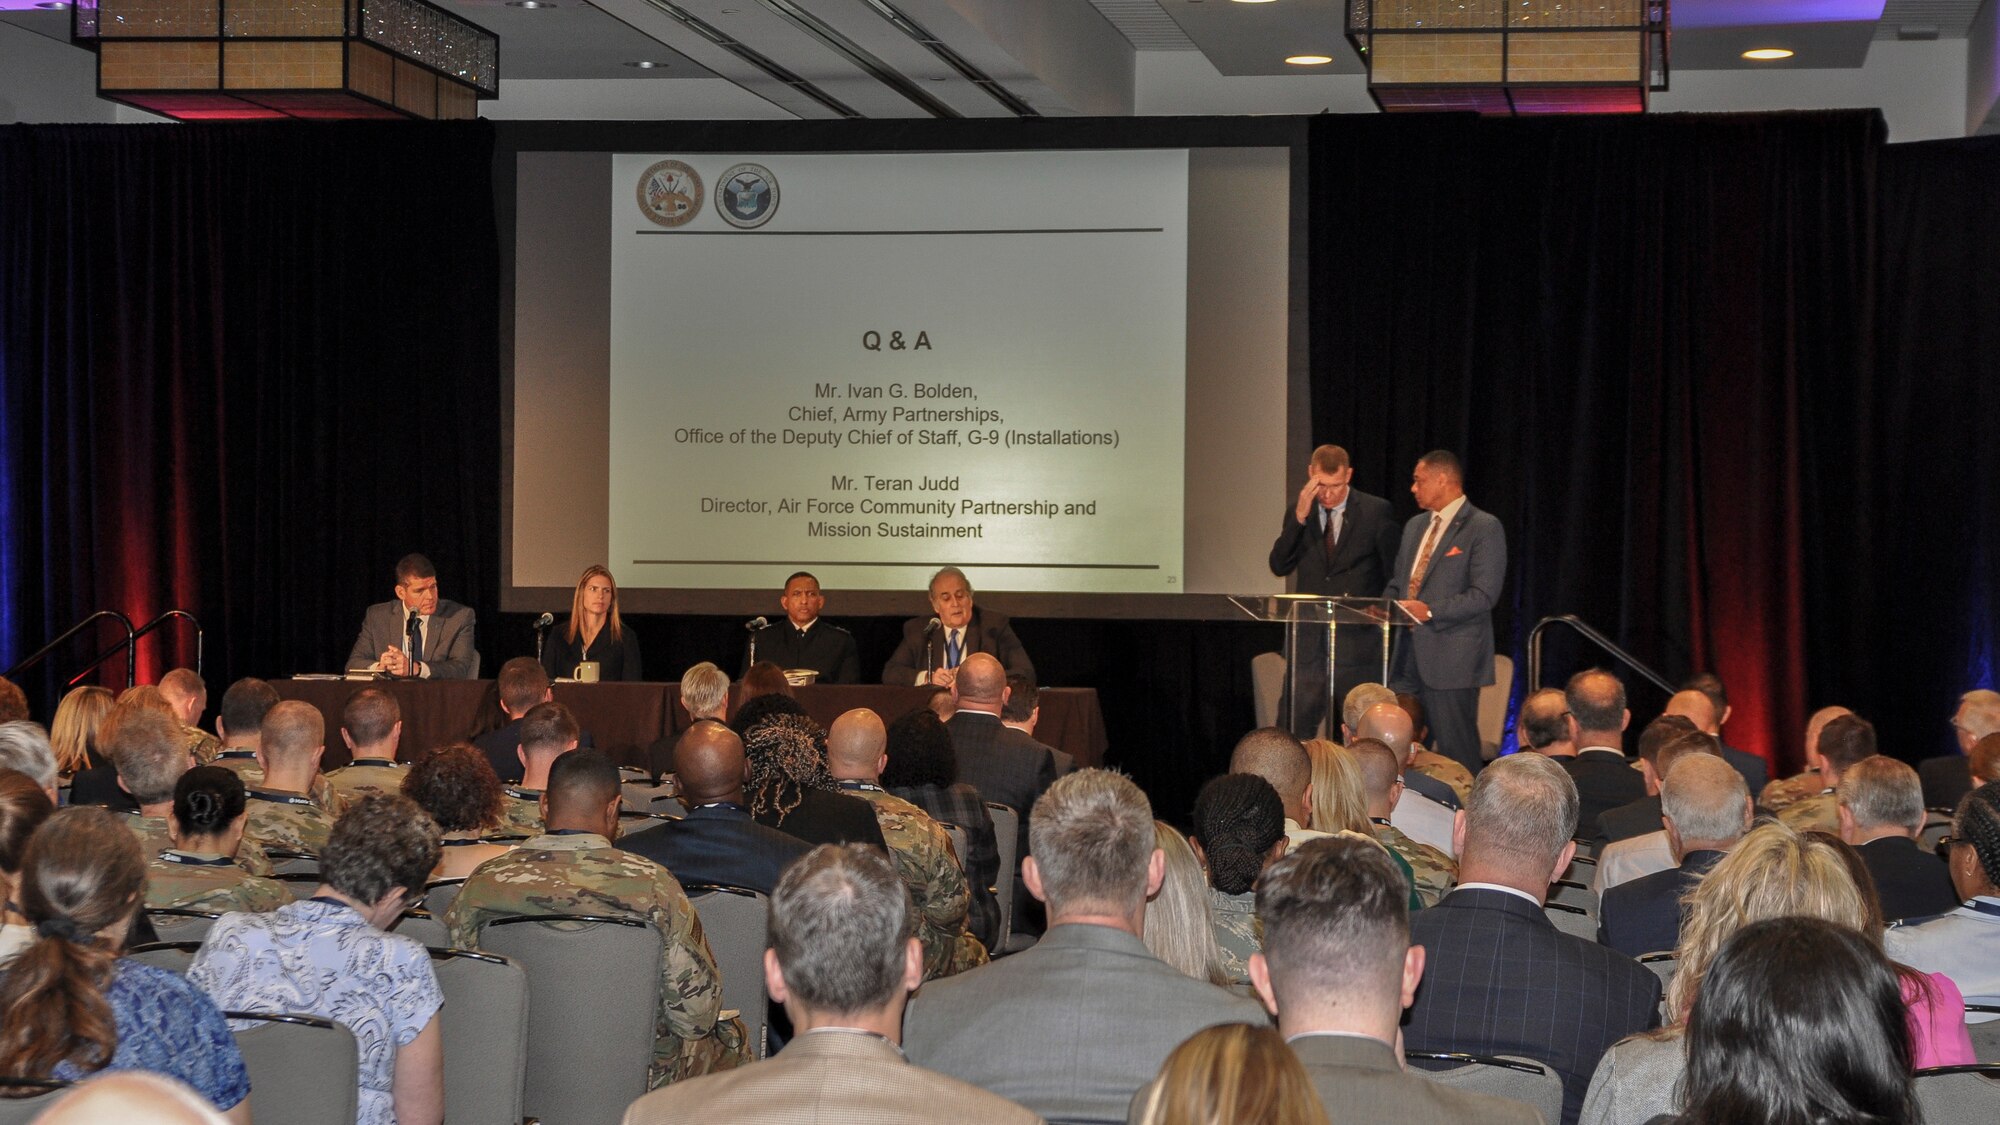 The Association of Defense Communities held the 2020 Installation Innovation conference on Feb. 10, 2020, at the Hyatt Regency Riverwalk, San Antonio, Texas. Lt. Col John Boccieri, the director of the commander’s action group assigned to the 910th Airlift Wing, attended the event to discuss additive manufacturing and its beneficial potential for Youngstown Air Reserve Station and the military as a whole.